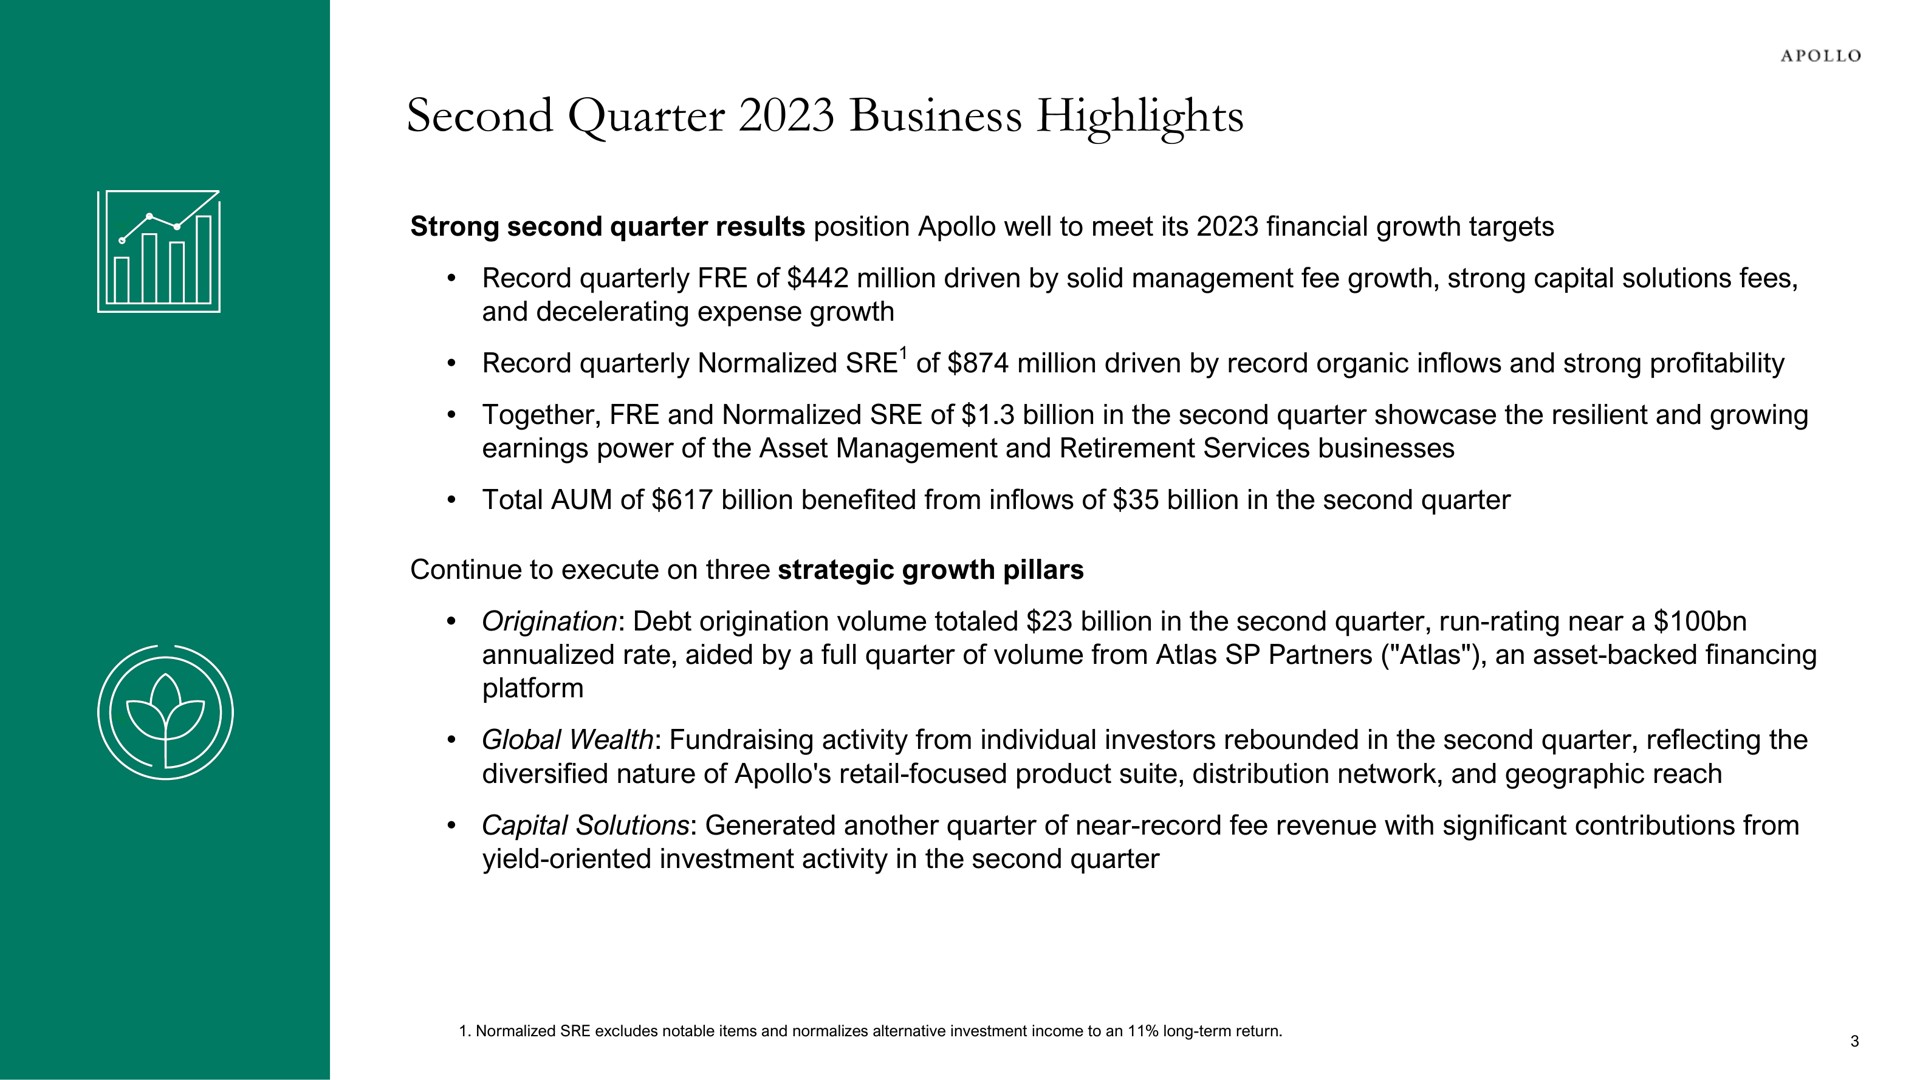 second quarter business highlights | Apollo Global Management